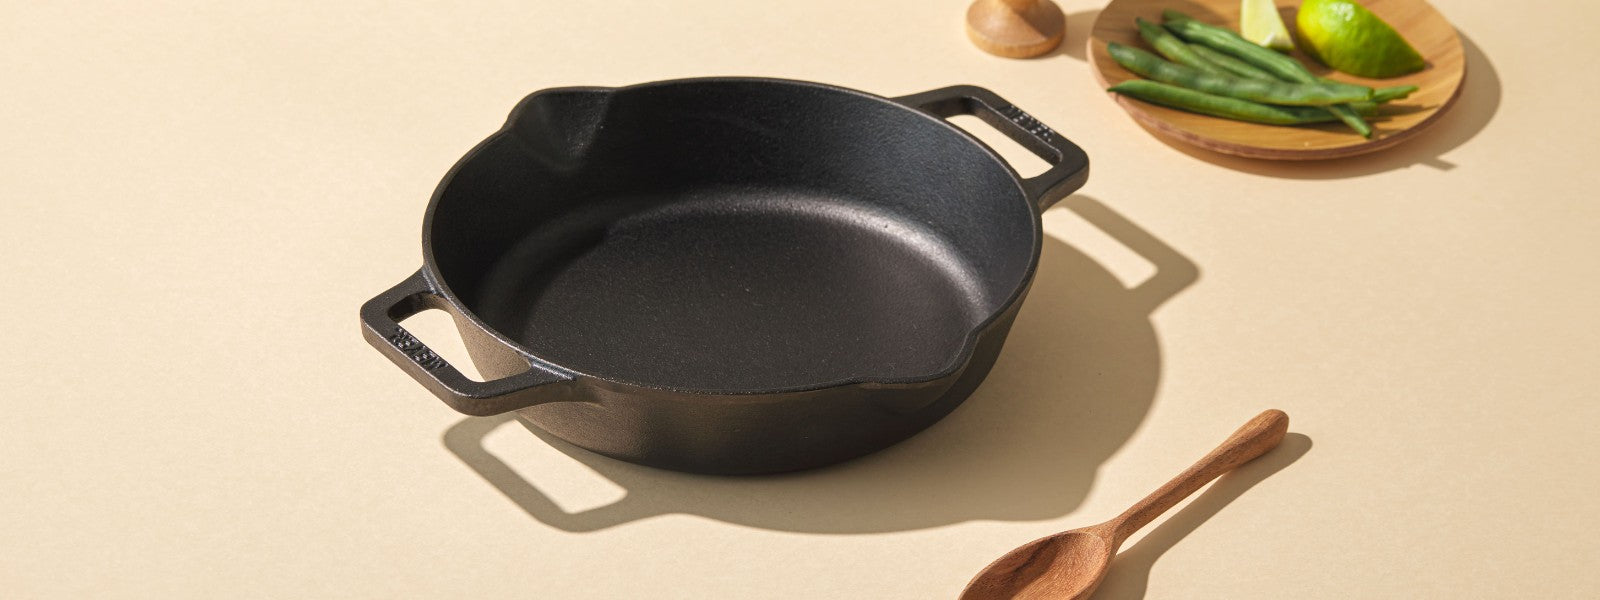 4 must-have pots and pans every Indian kitchen needs - PotsandPans India